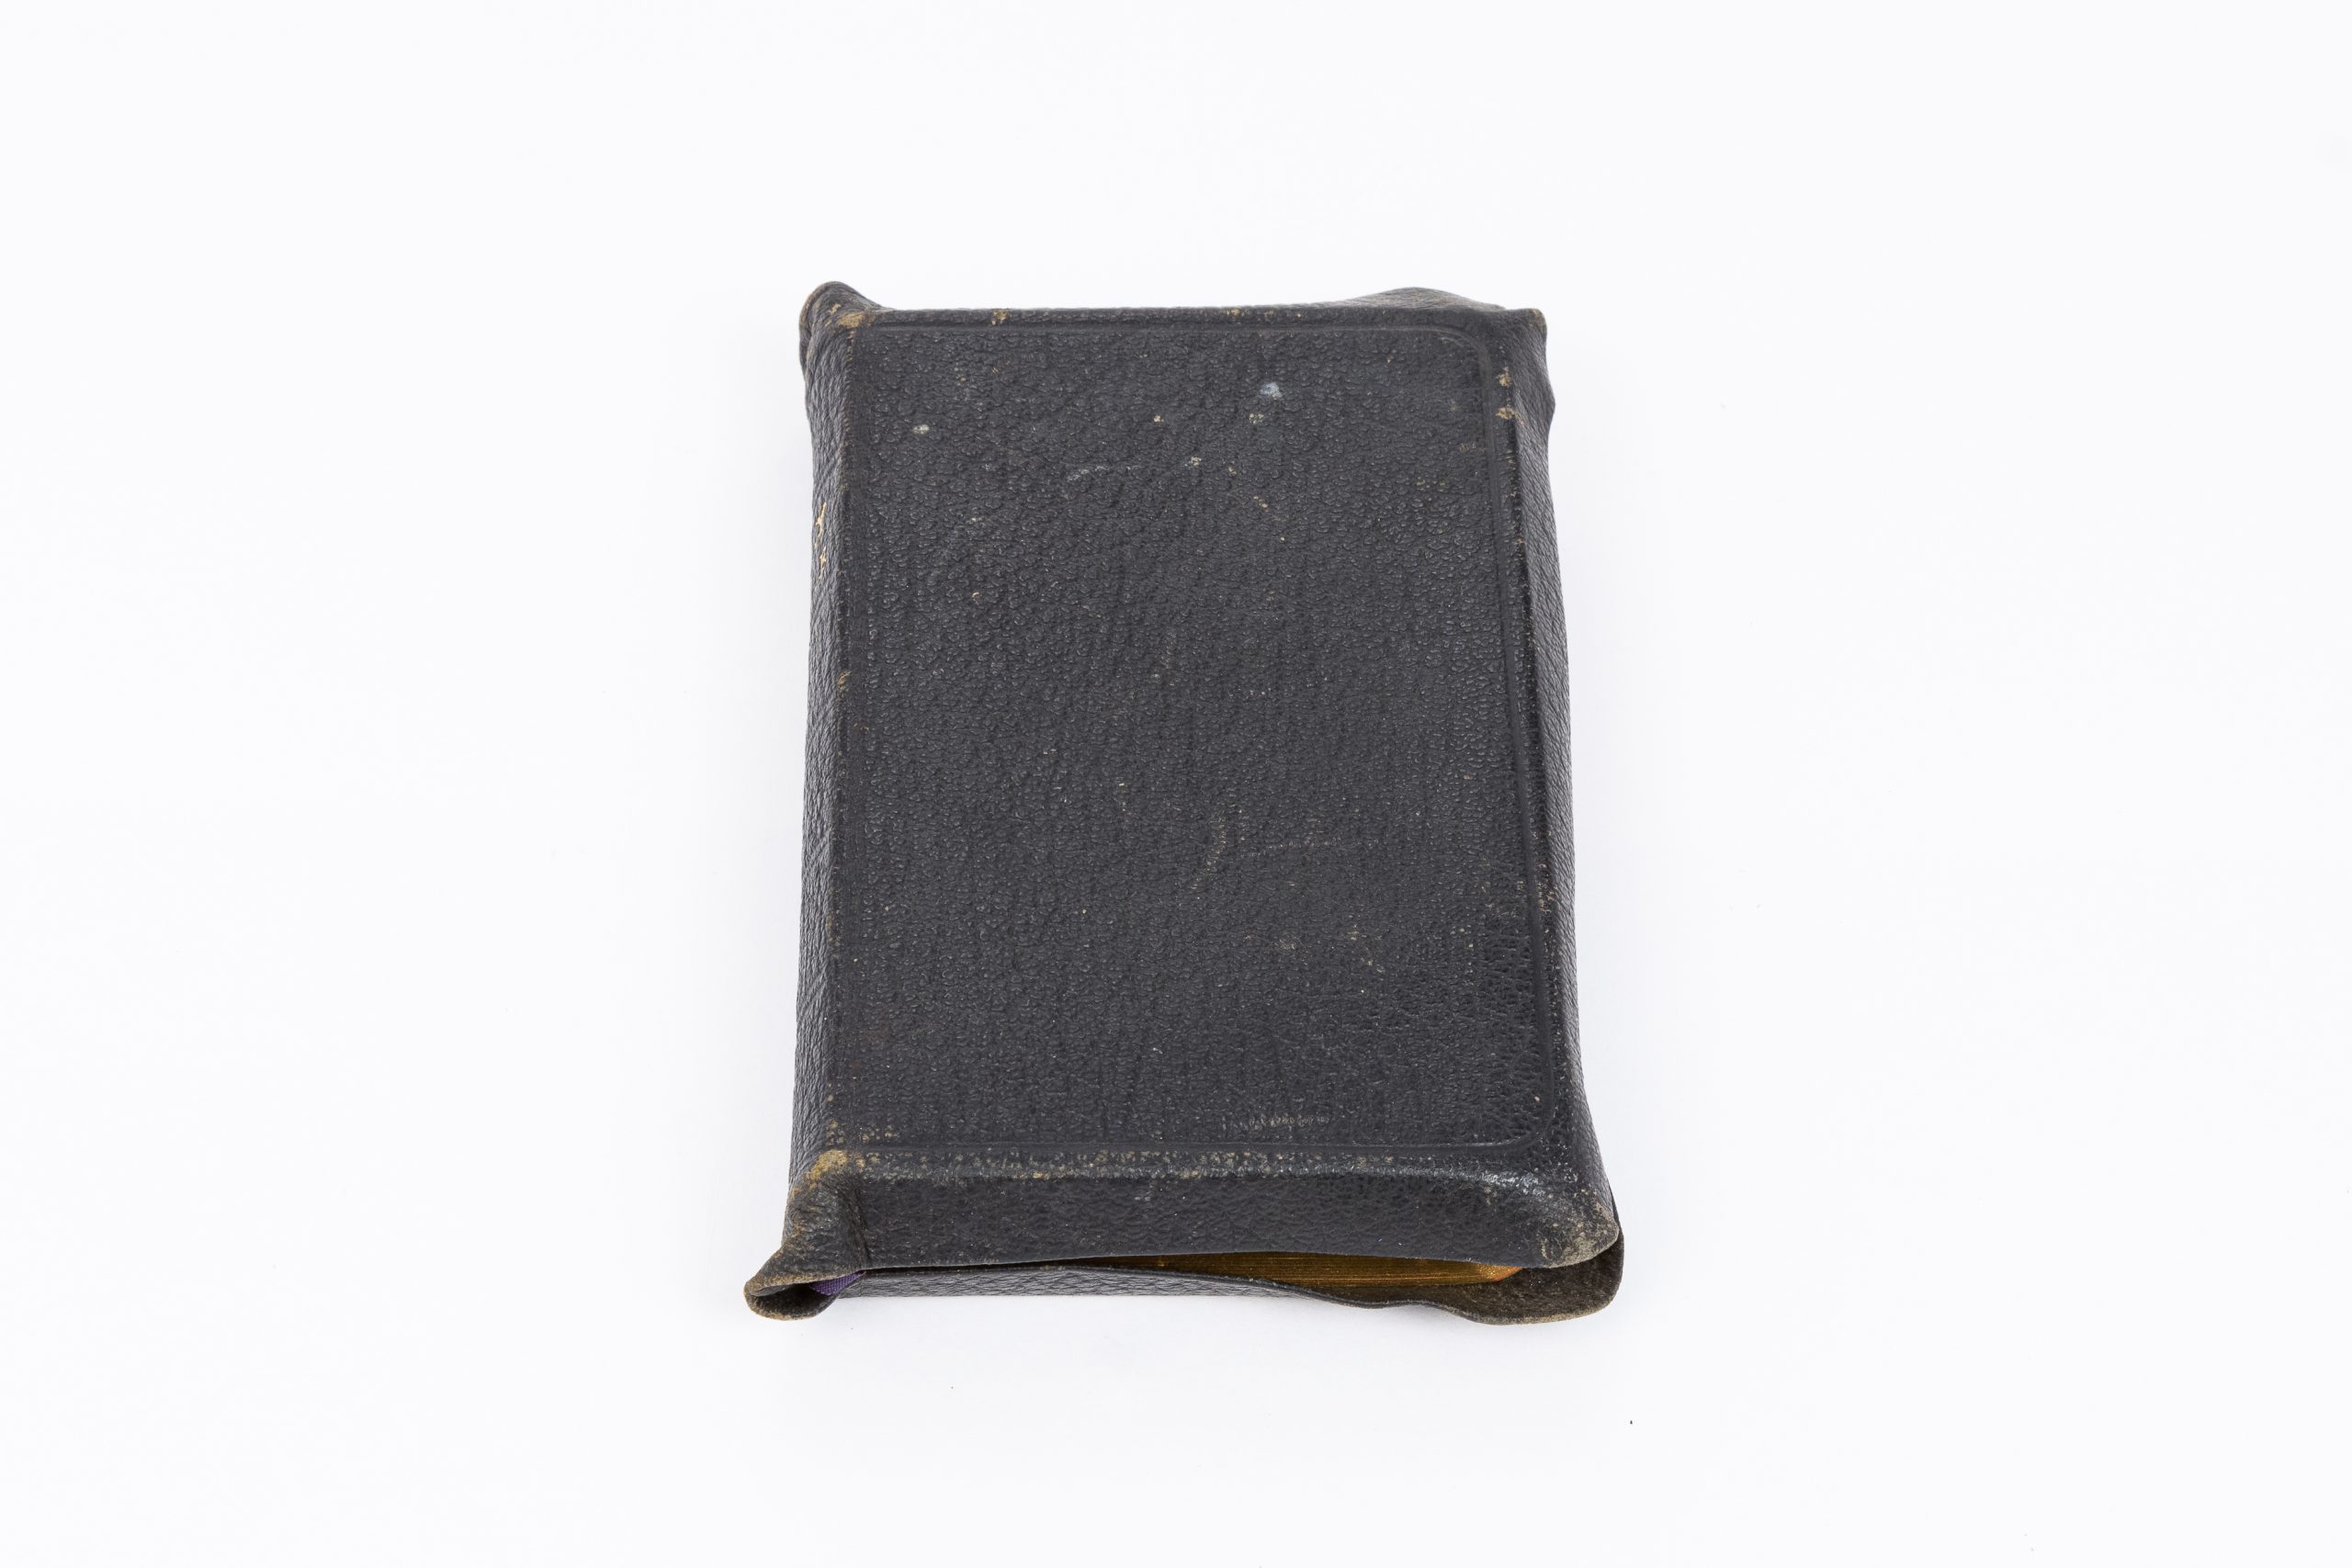 Black, leather-bound bible which is slightly tarnished